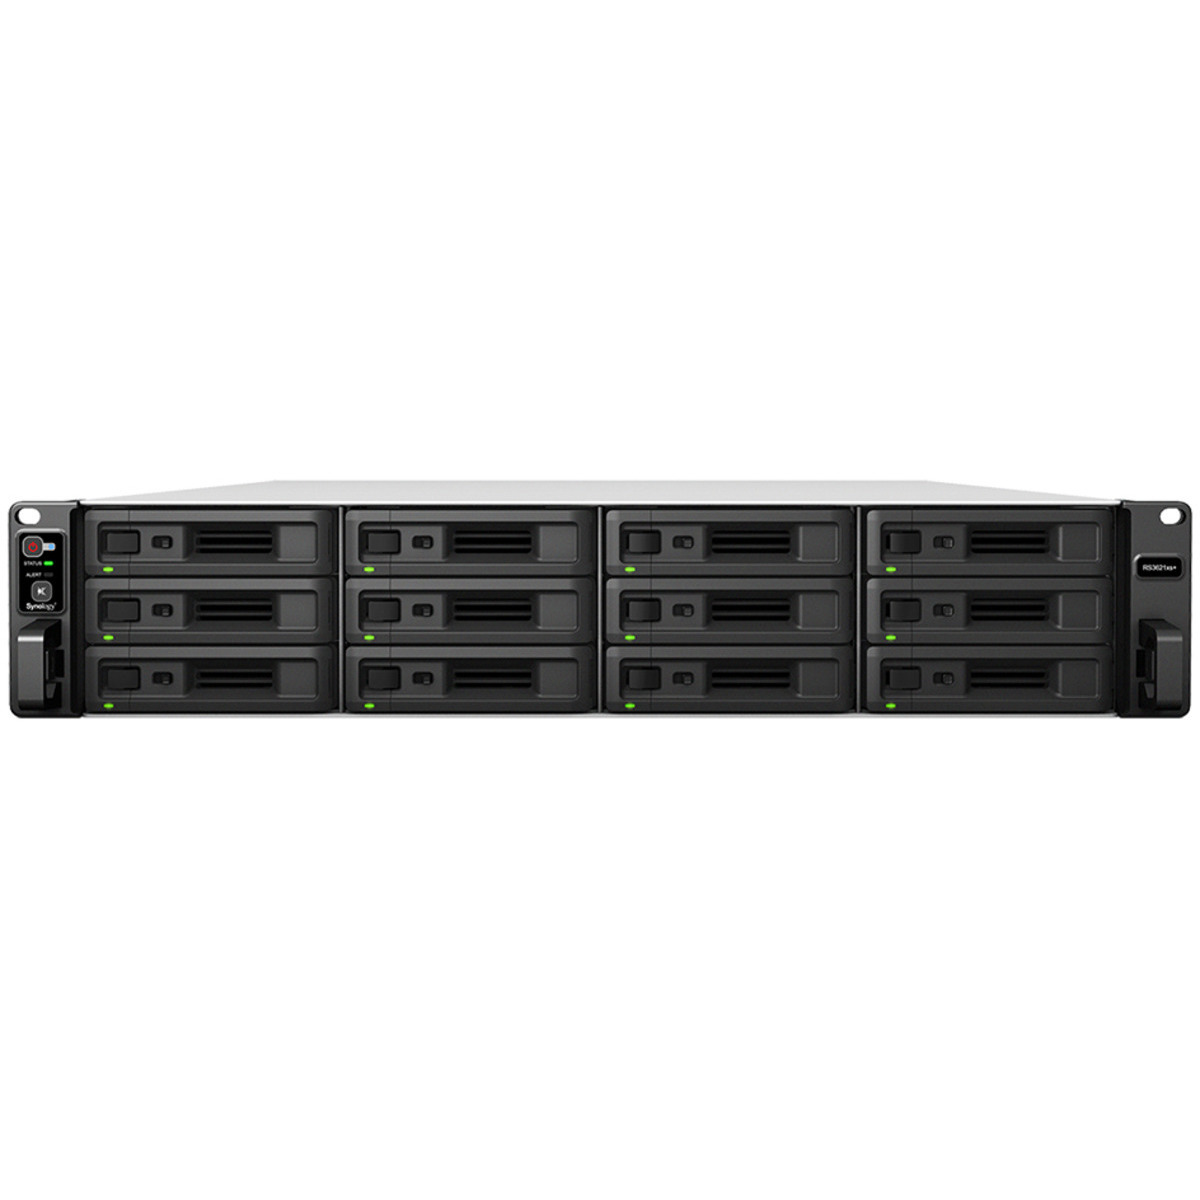 Synology RackStation RS3621xs+ 216tb 12-Bay RackMount Large Business / Enterprise NAS - Network Attached Storage Device 9x24tb Seagate EXOS X24 ST24000NM002H 3.5 7200rpm SATA 6Gb/s HDD ENTERPRISE Class Drives Installed - Burn-In Tested RackStation RS3621xs+